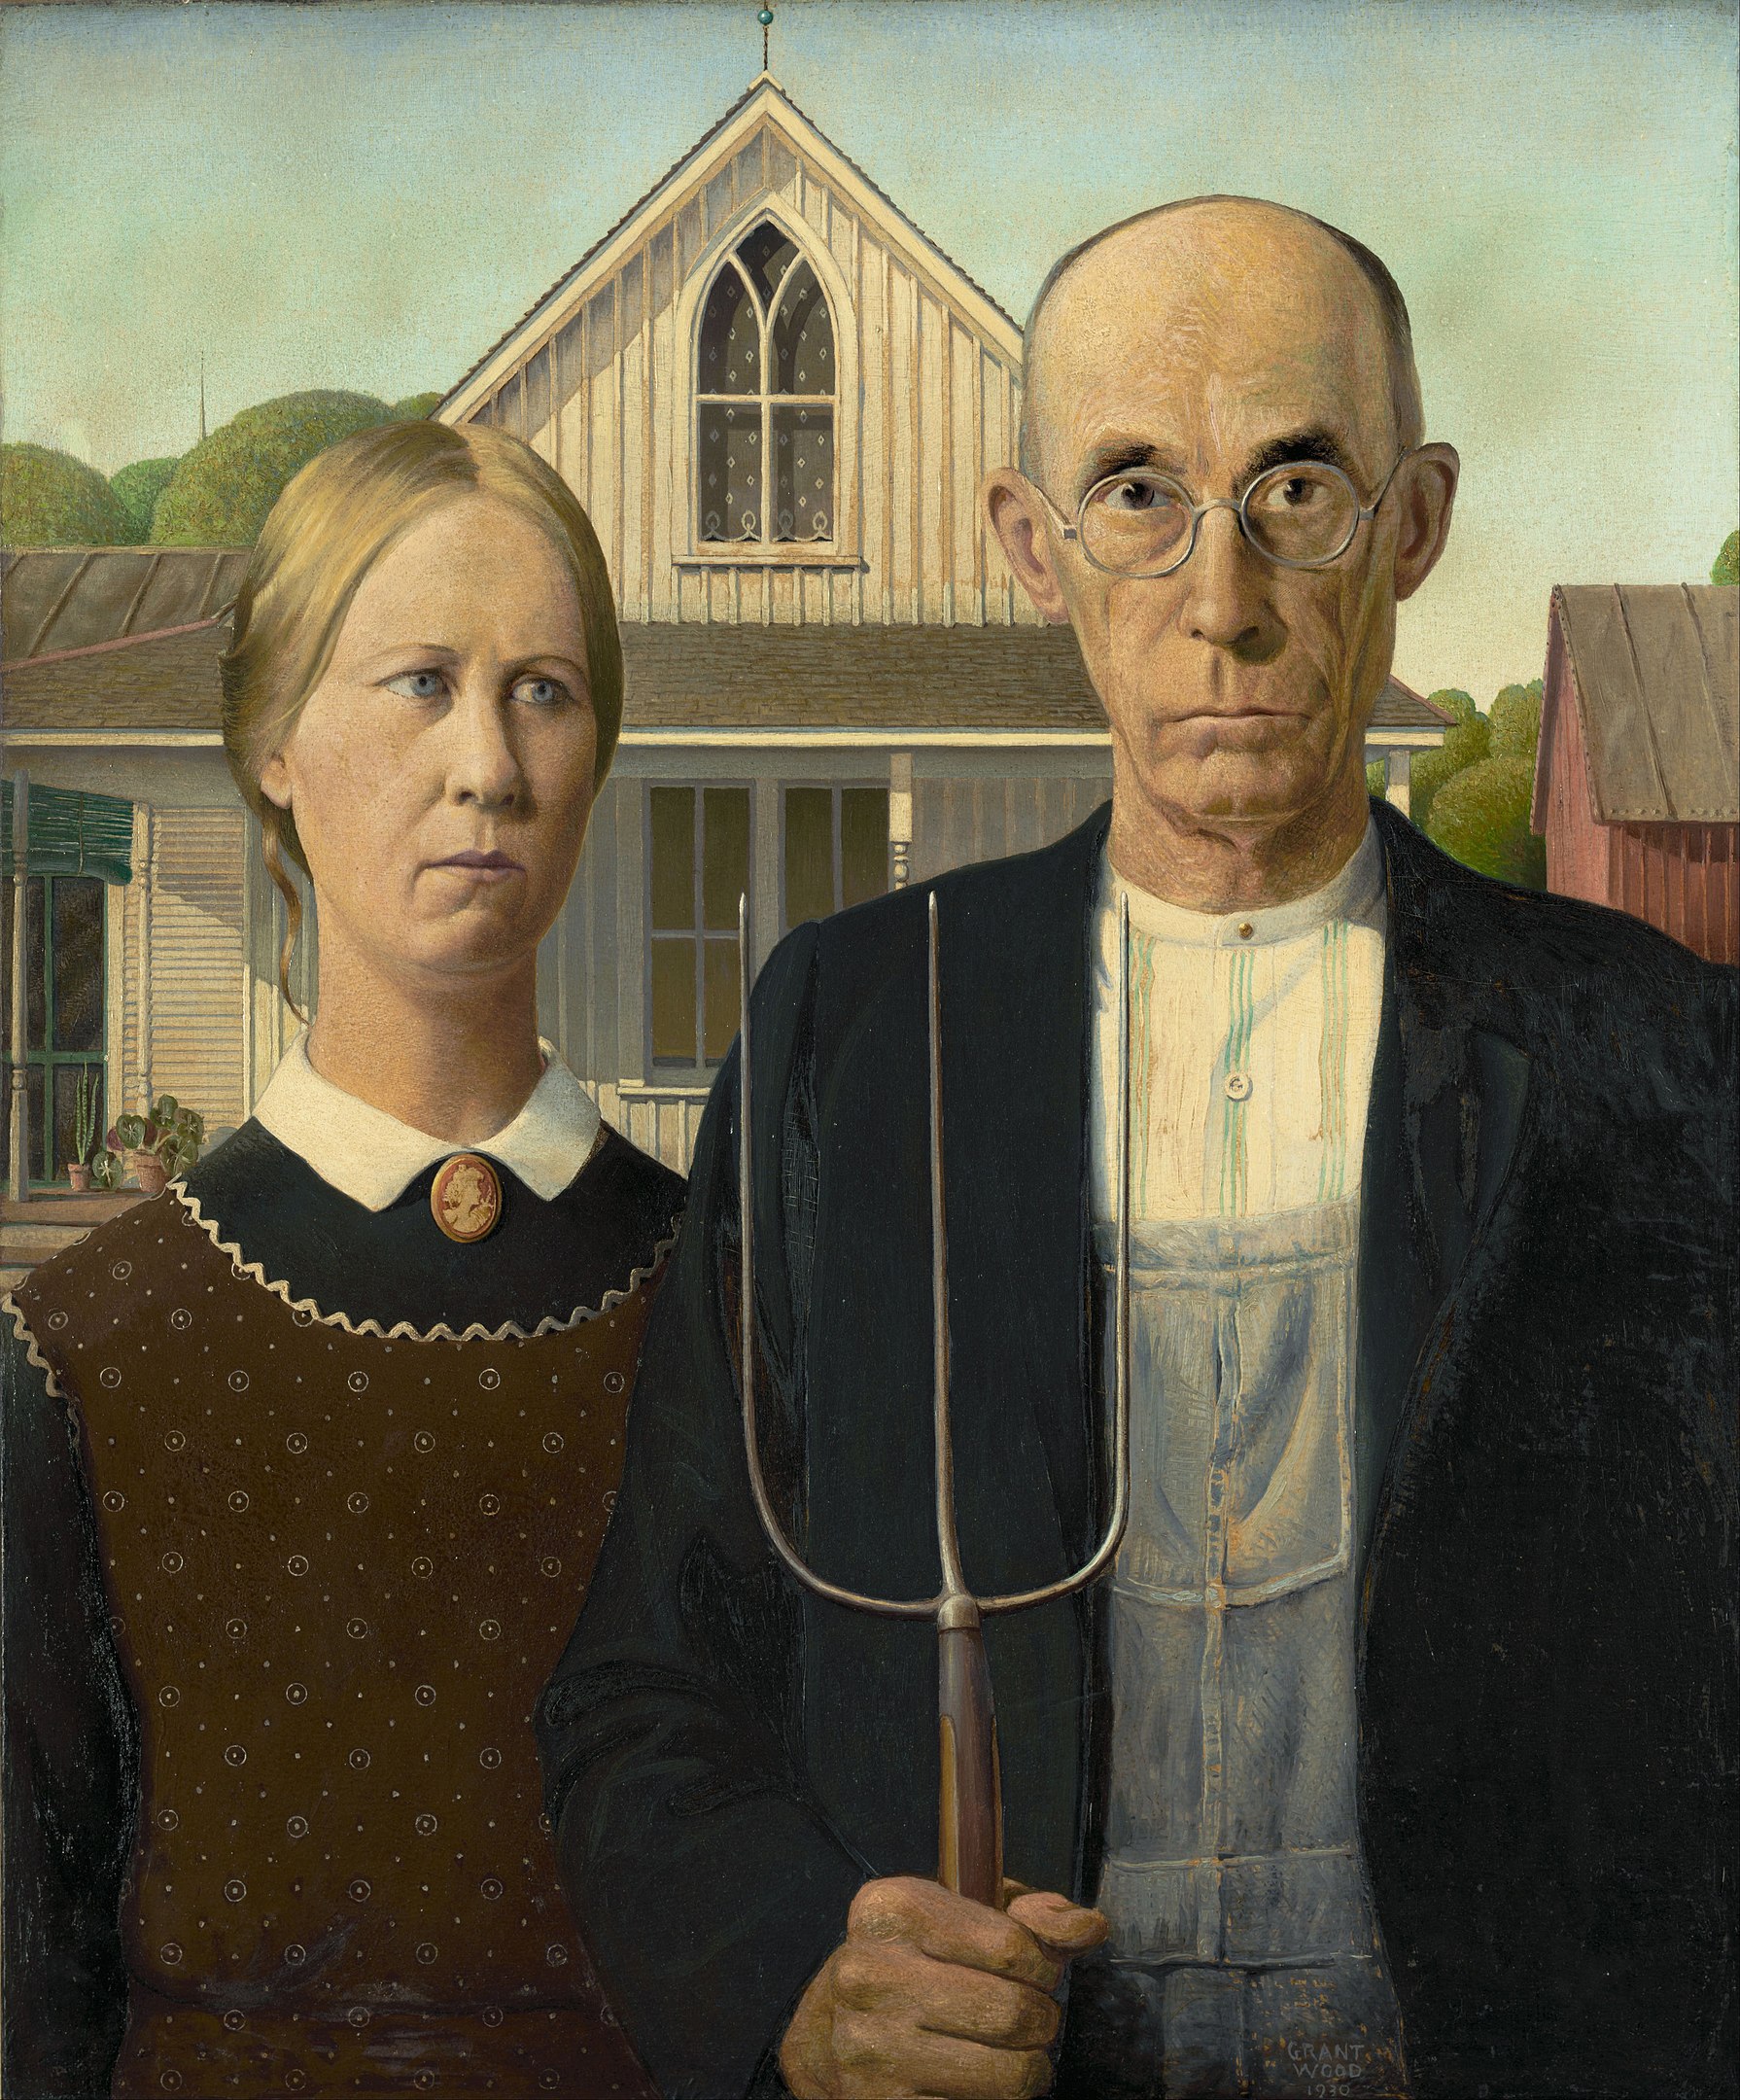 American Gothic by Grant Wood - 1930 - 74 cm x 62 cm Art Institute of Chicago